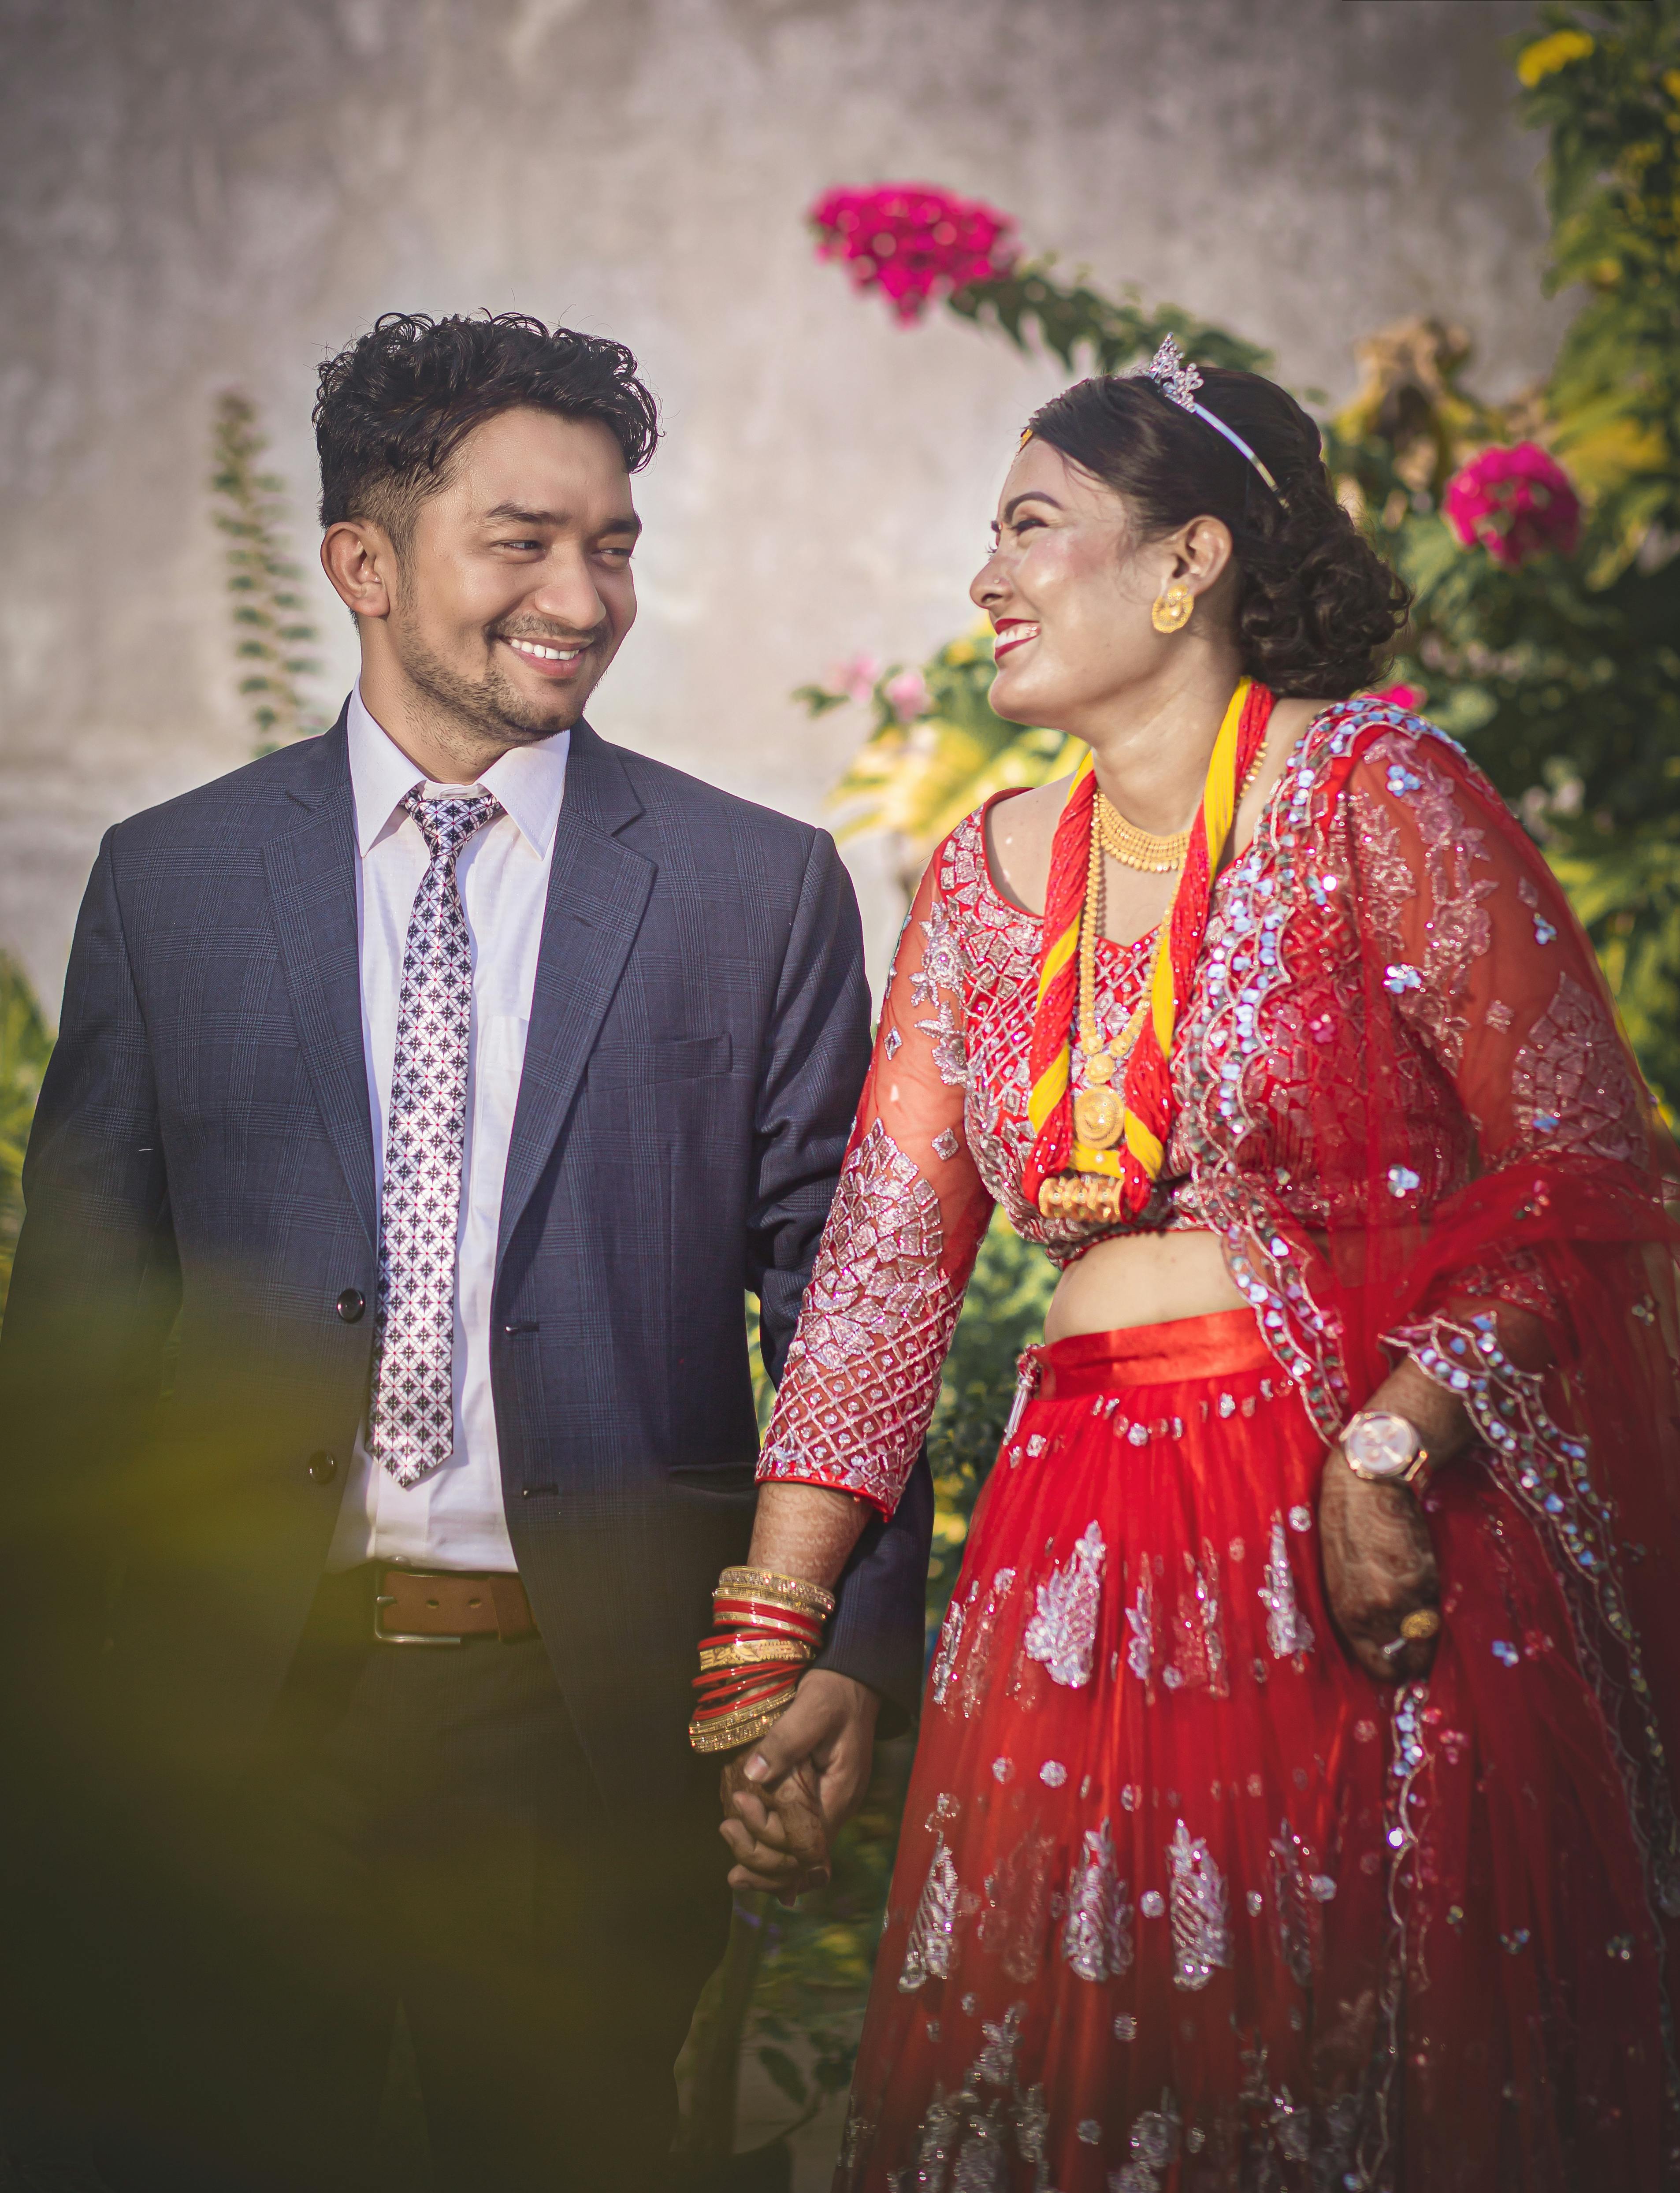 Awesome Punjabi Wedding Pictures - ❤️❤️ ———————————————. Photography by:-  @samimakeovers . ———————————————. - Follow our page @punjabi.couple . Share  on your story .need your support. - - #punjabi #couple #sikhwedding  #punjabicouples #punjabicouple #